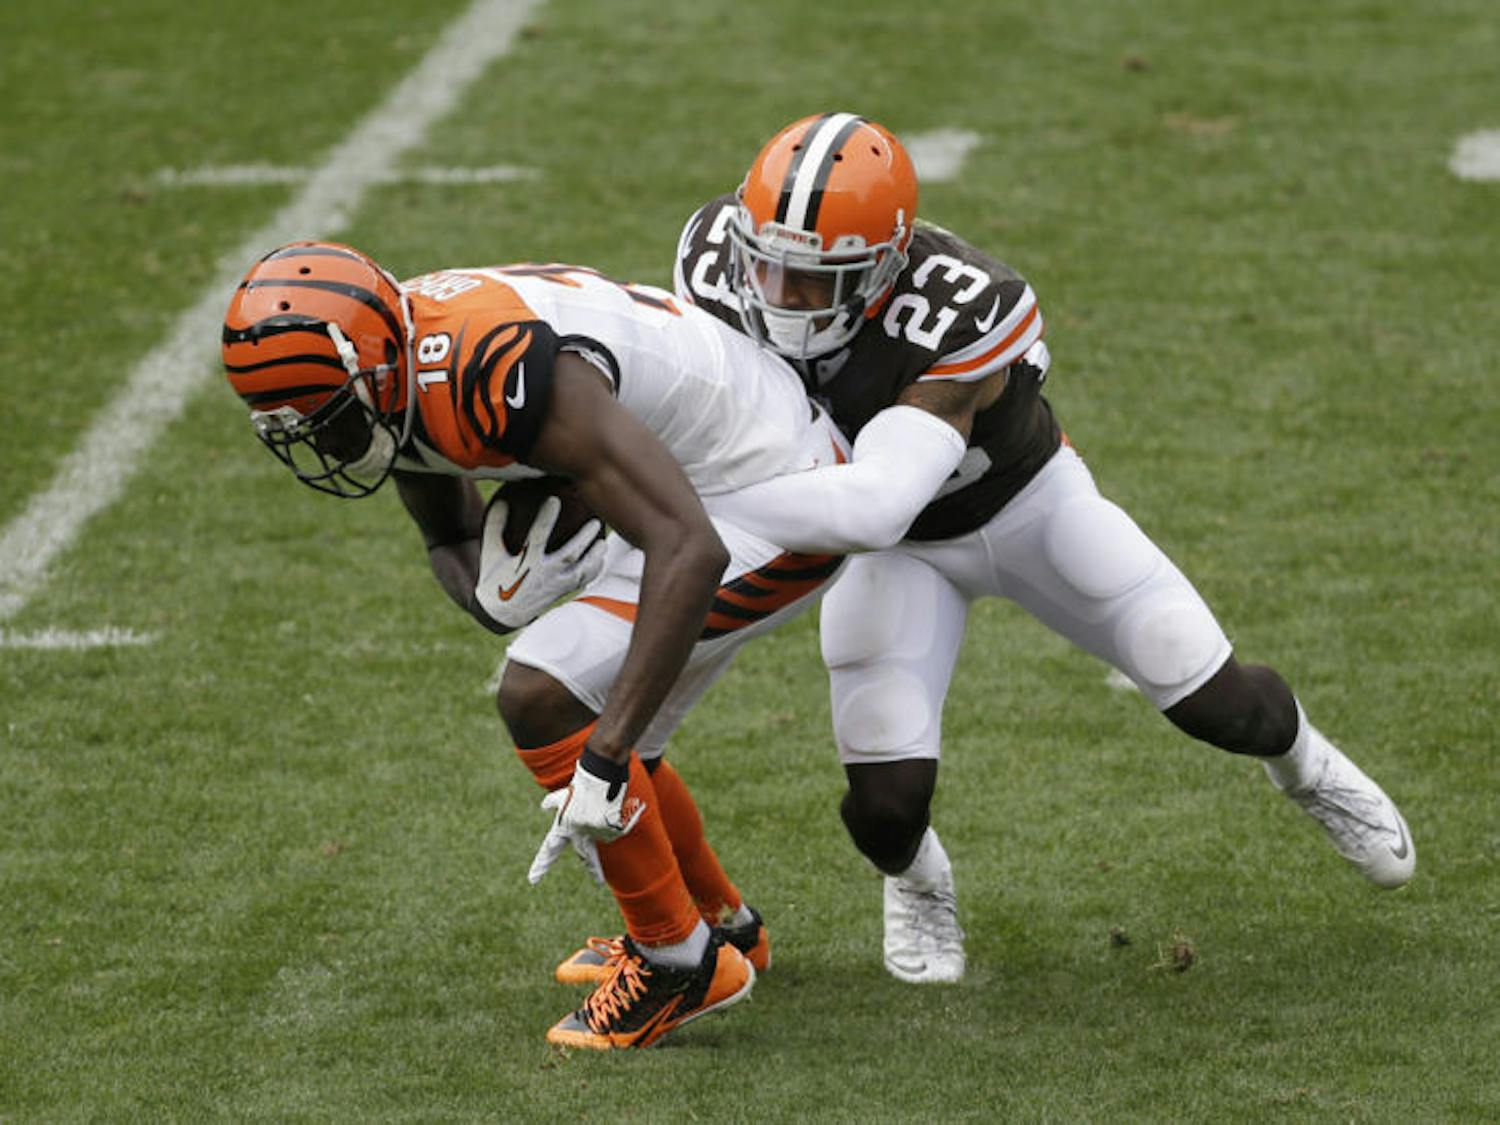 Cleveland Browns cornerback Joe Haden (right) tackles Cincinnati Bengals A.J. Green during an NFL football game in Cleveland